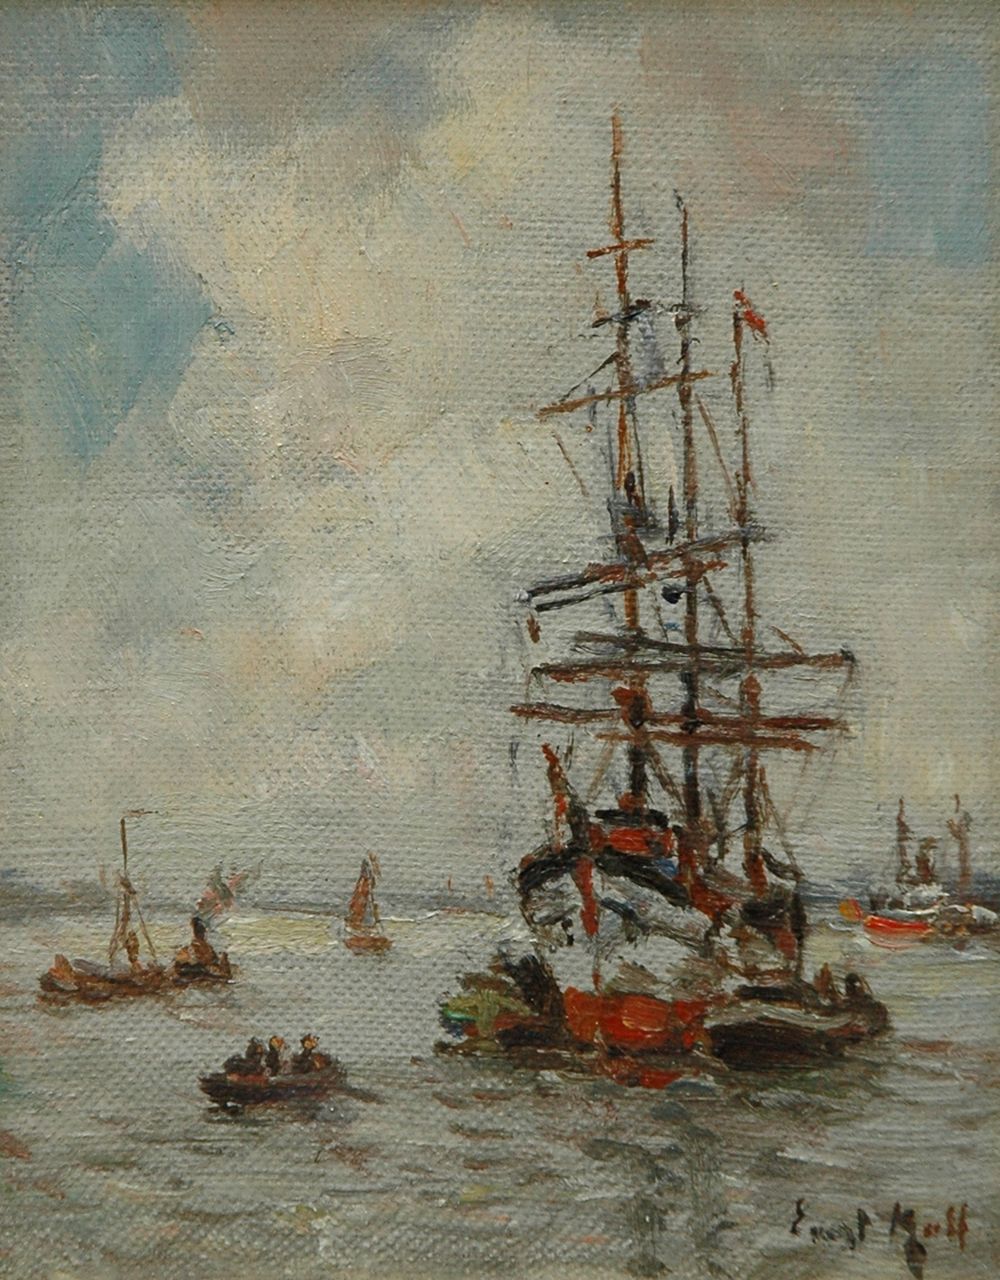 Moll E.  | Evert Moll, Towboats and a moored three-master at the Nieuwe Maas, Rotterdam, Öl auf Leinwand auf Holz 14,0 x 11,0 cm, signed l.r.